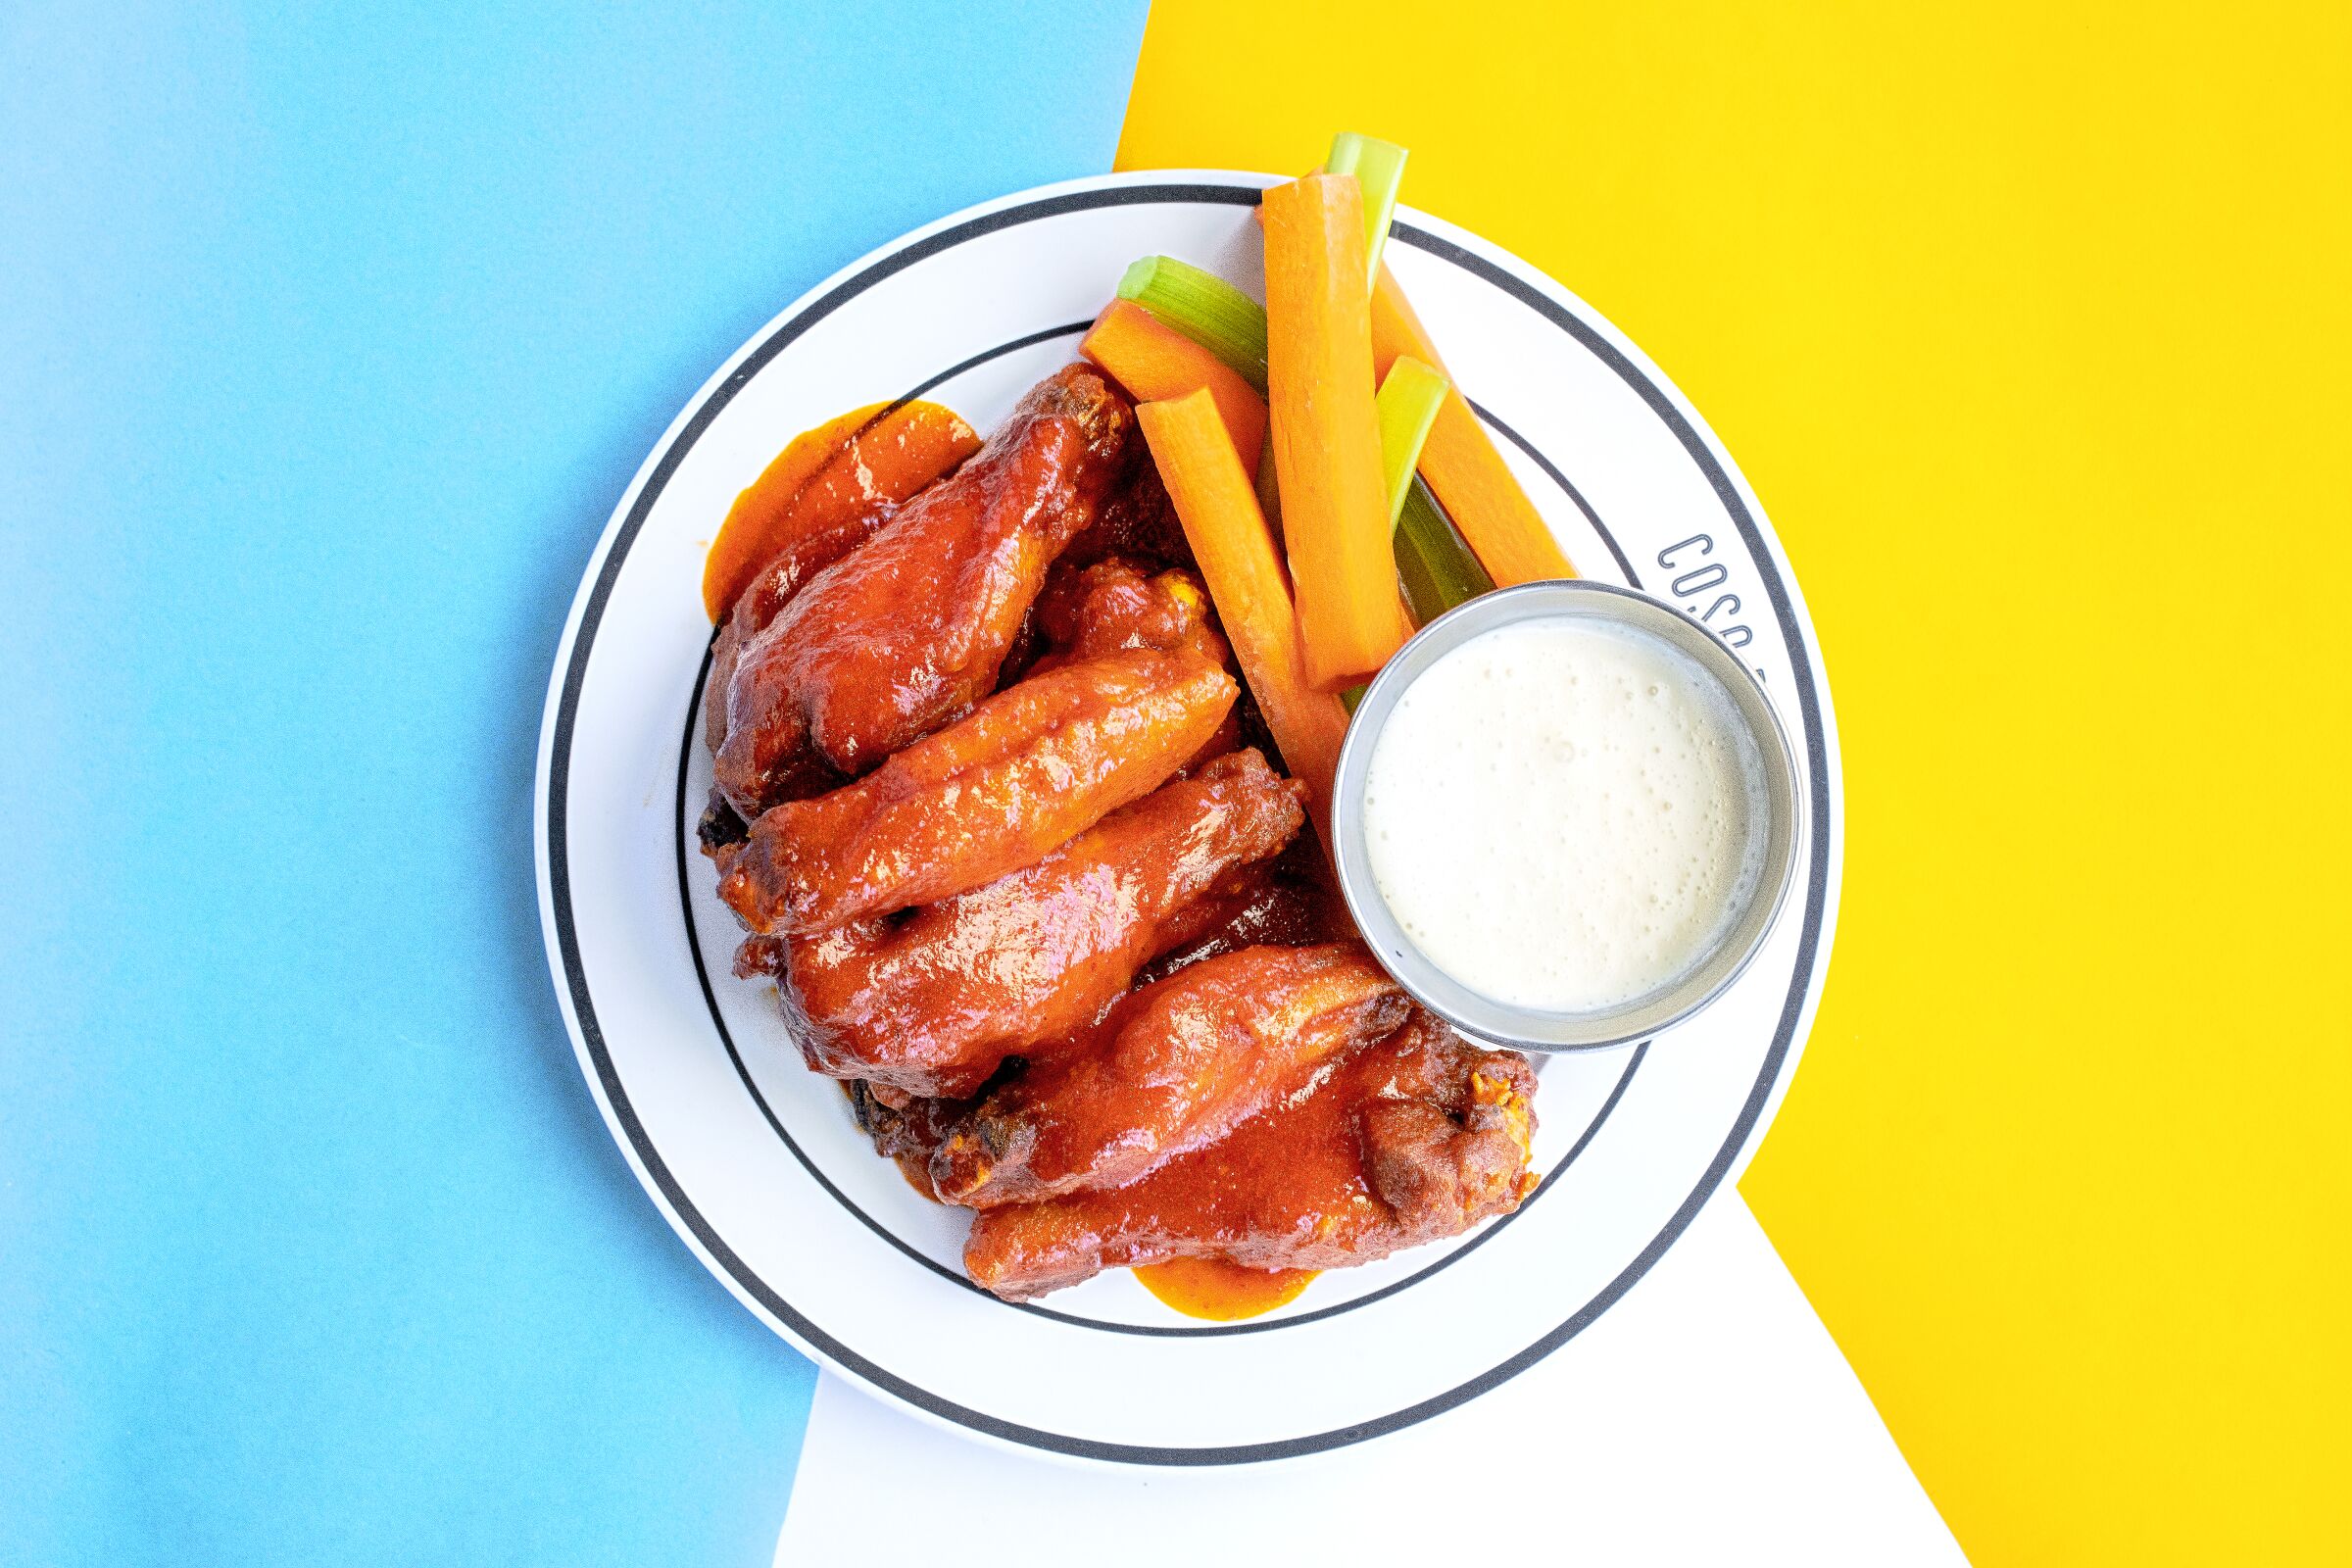 Chicken wings with Zach's Red Hot, carrots, celery and Gorgonzola dipping sauce at Cosa Buona in Los Angeles.